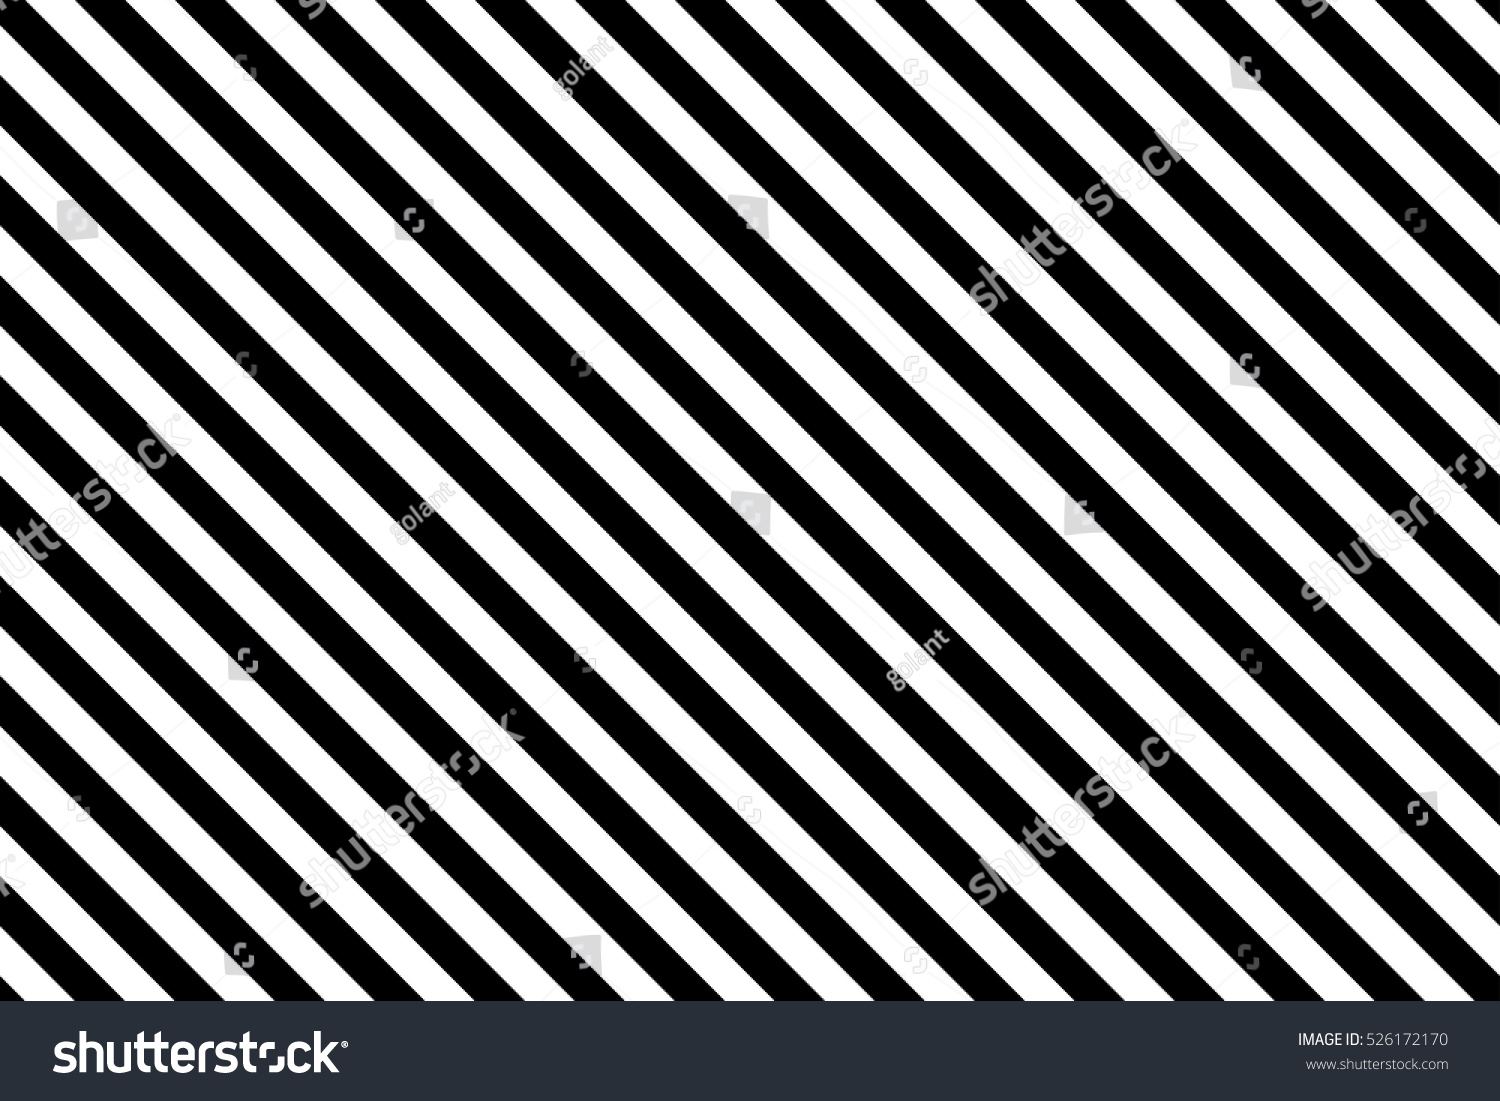 Black Stripes On White Background Striped Stock Vector (Royalty Free ...